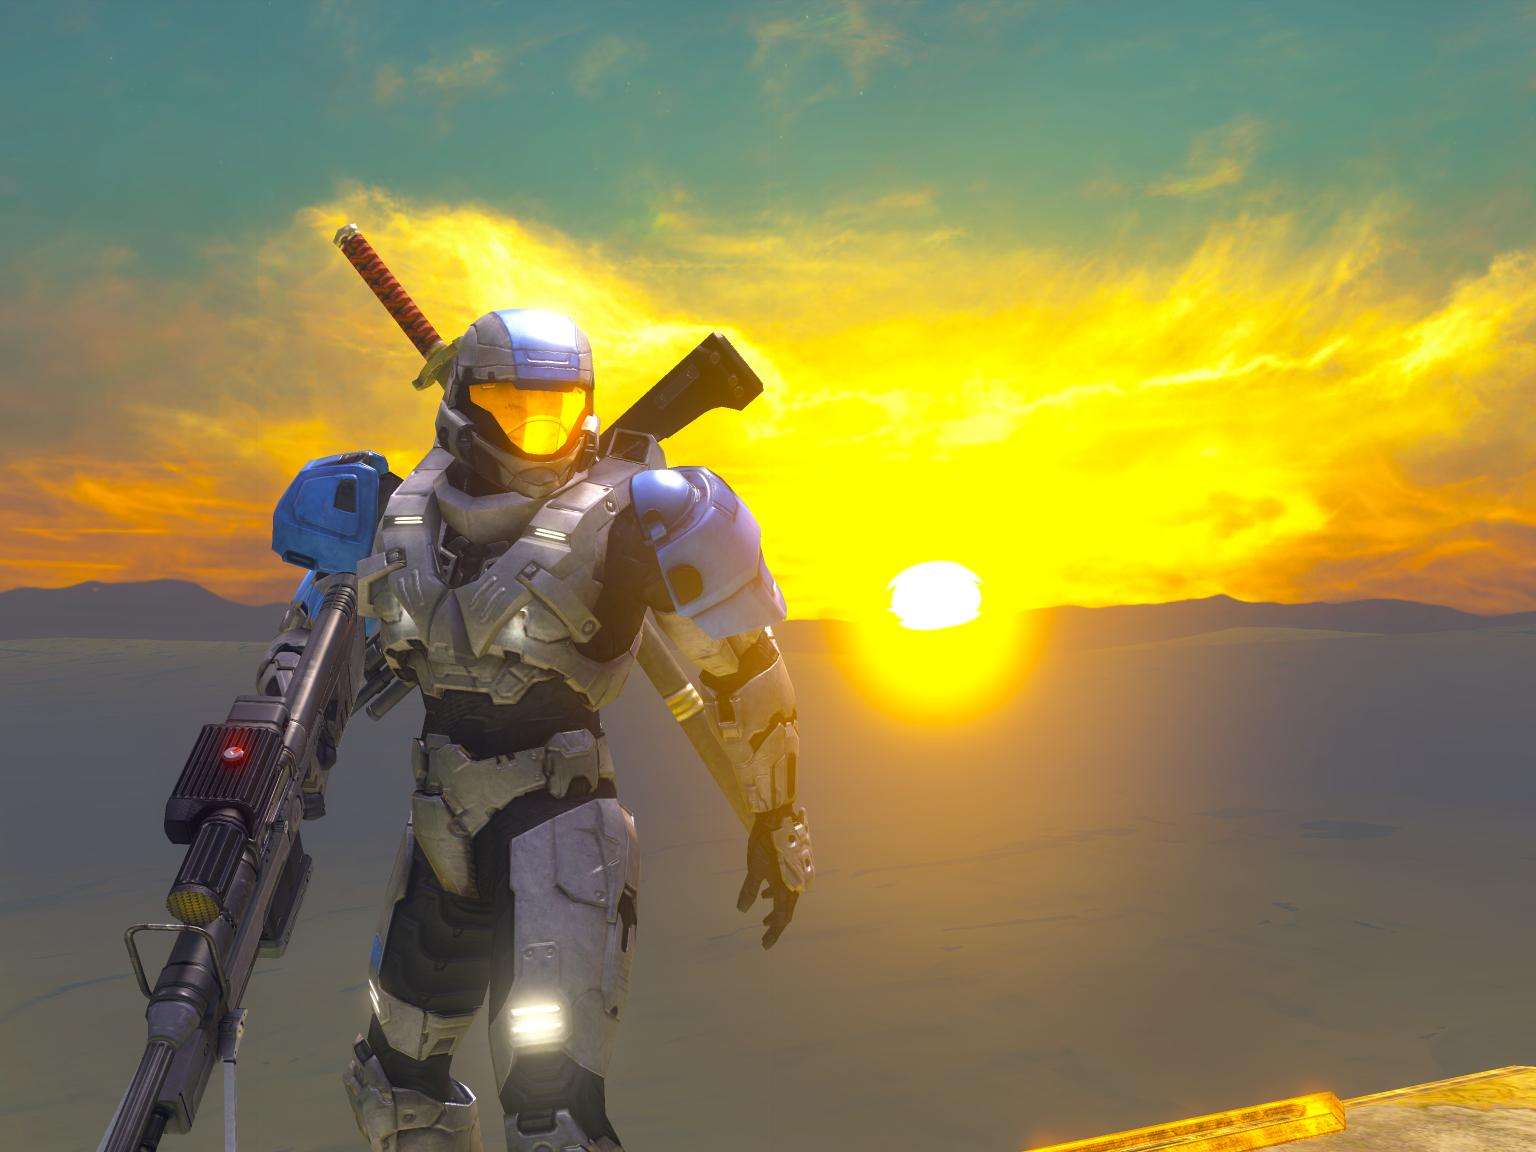  I got this pose which made me think of a Halo 3 Wallpaper or Postcard.